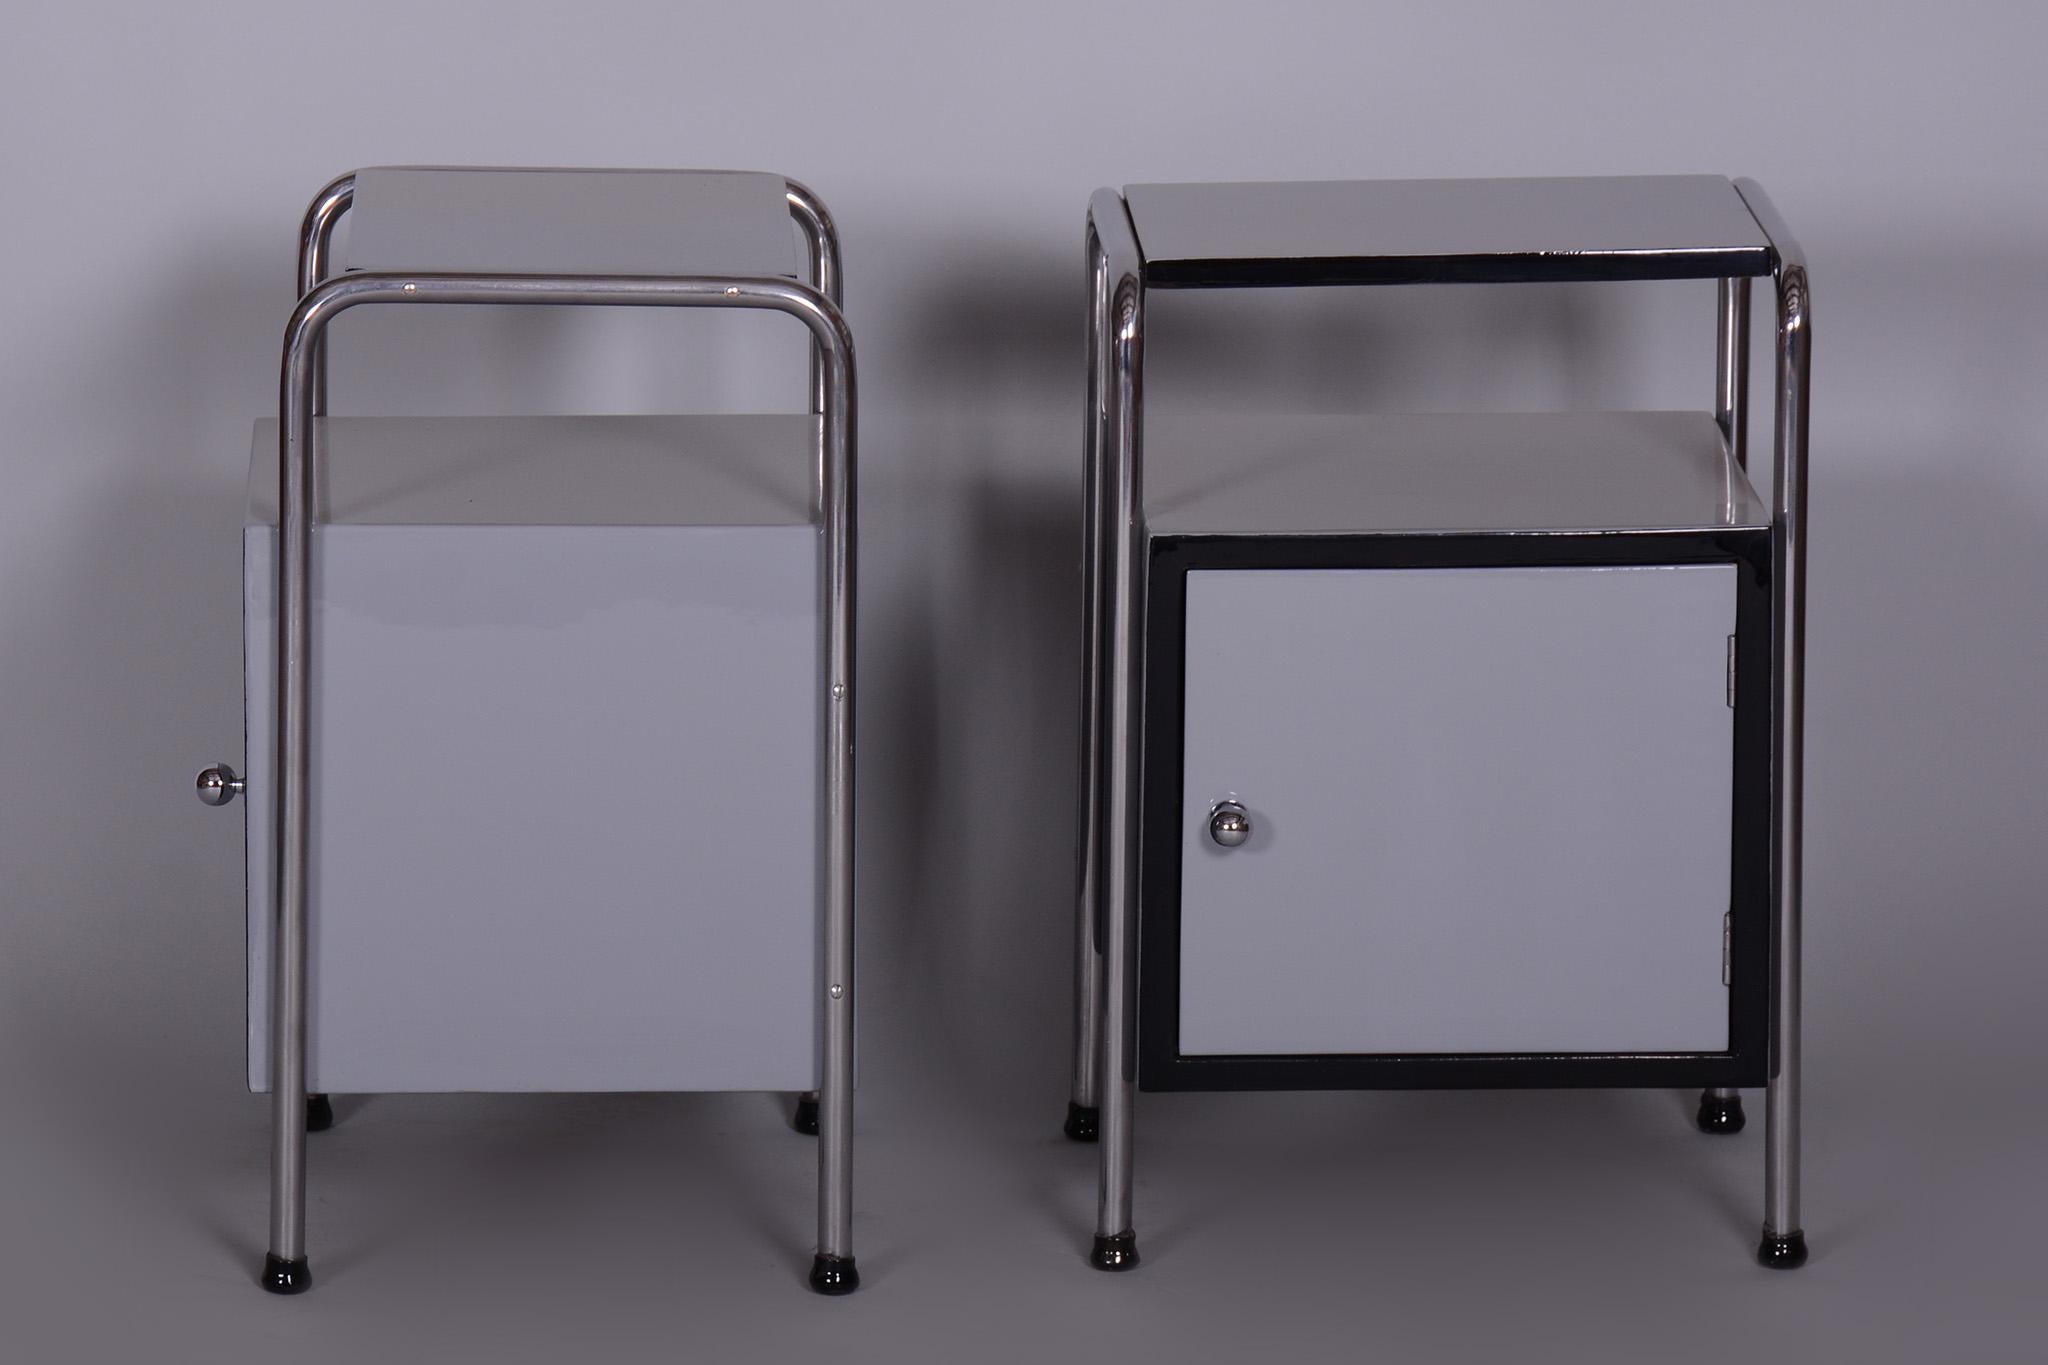 Restored Bed-Side Tables, Vichr a Spol, Chrome-Plated Steel, Czechia, 1930s For Sale 2